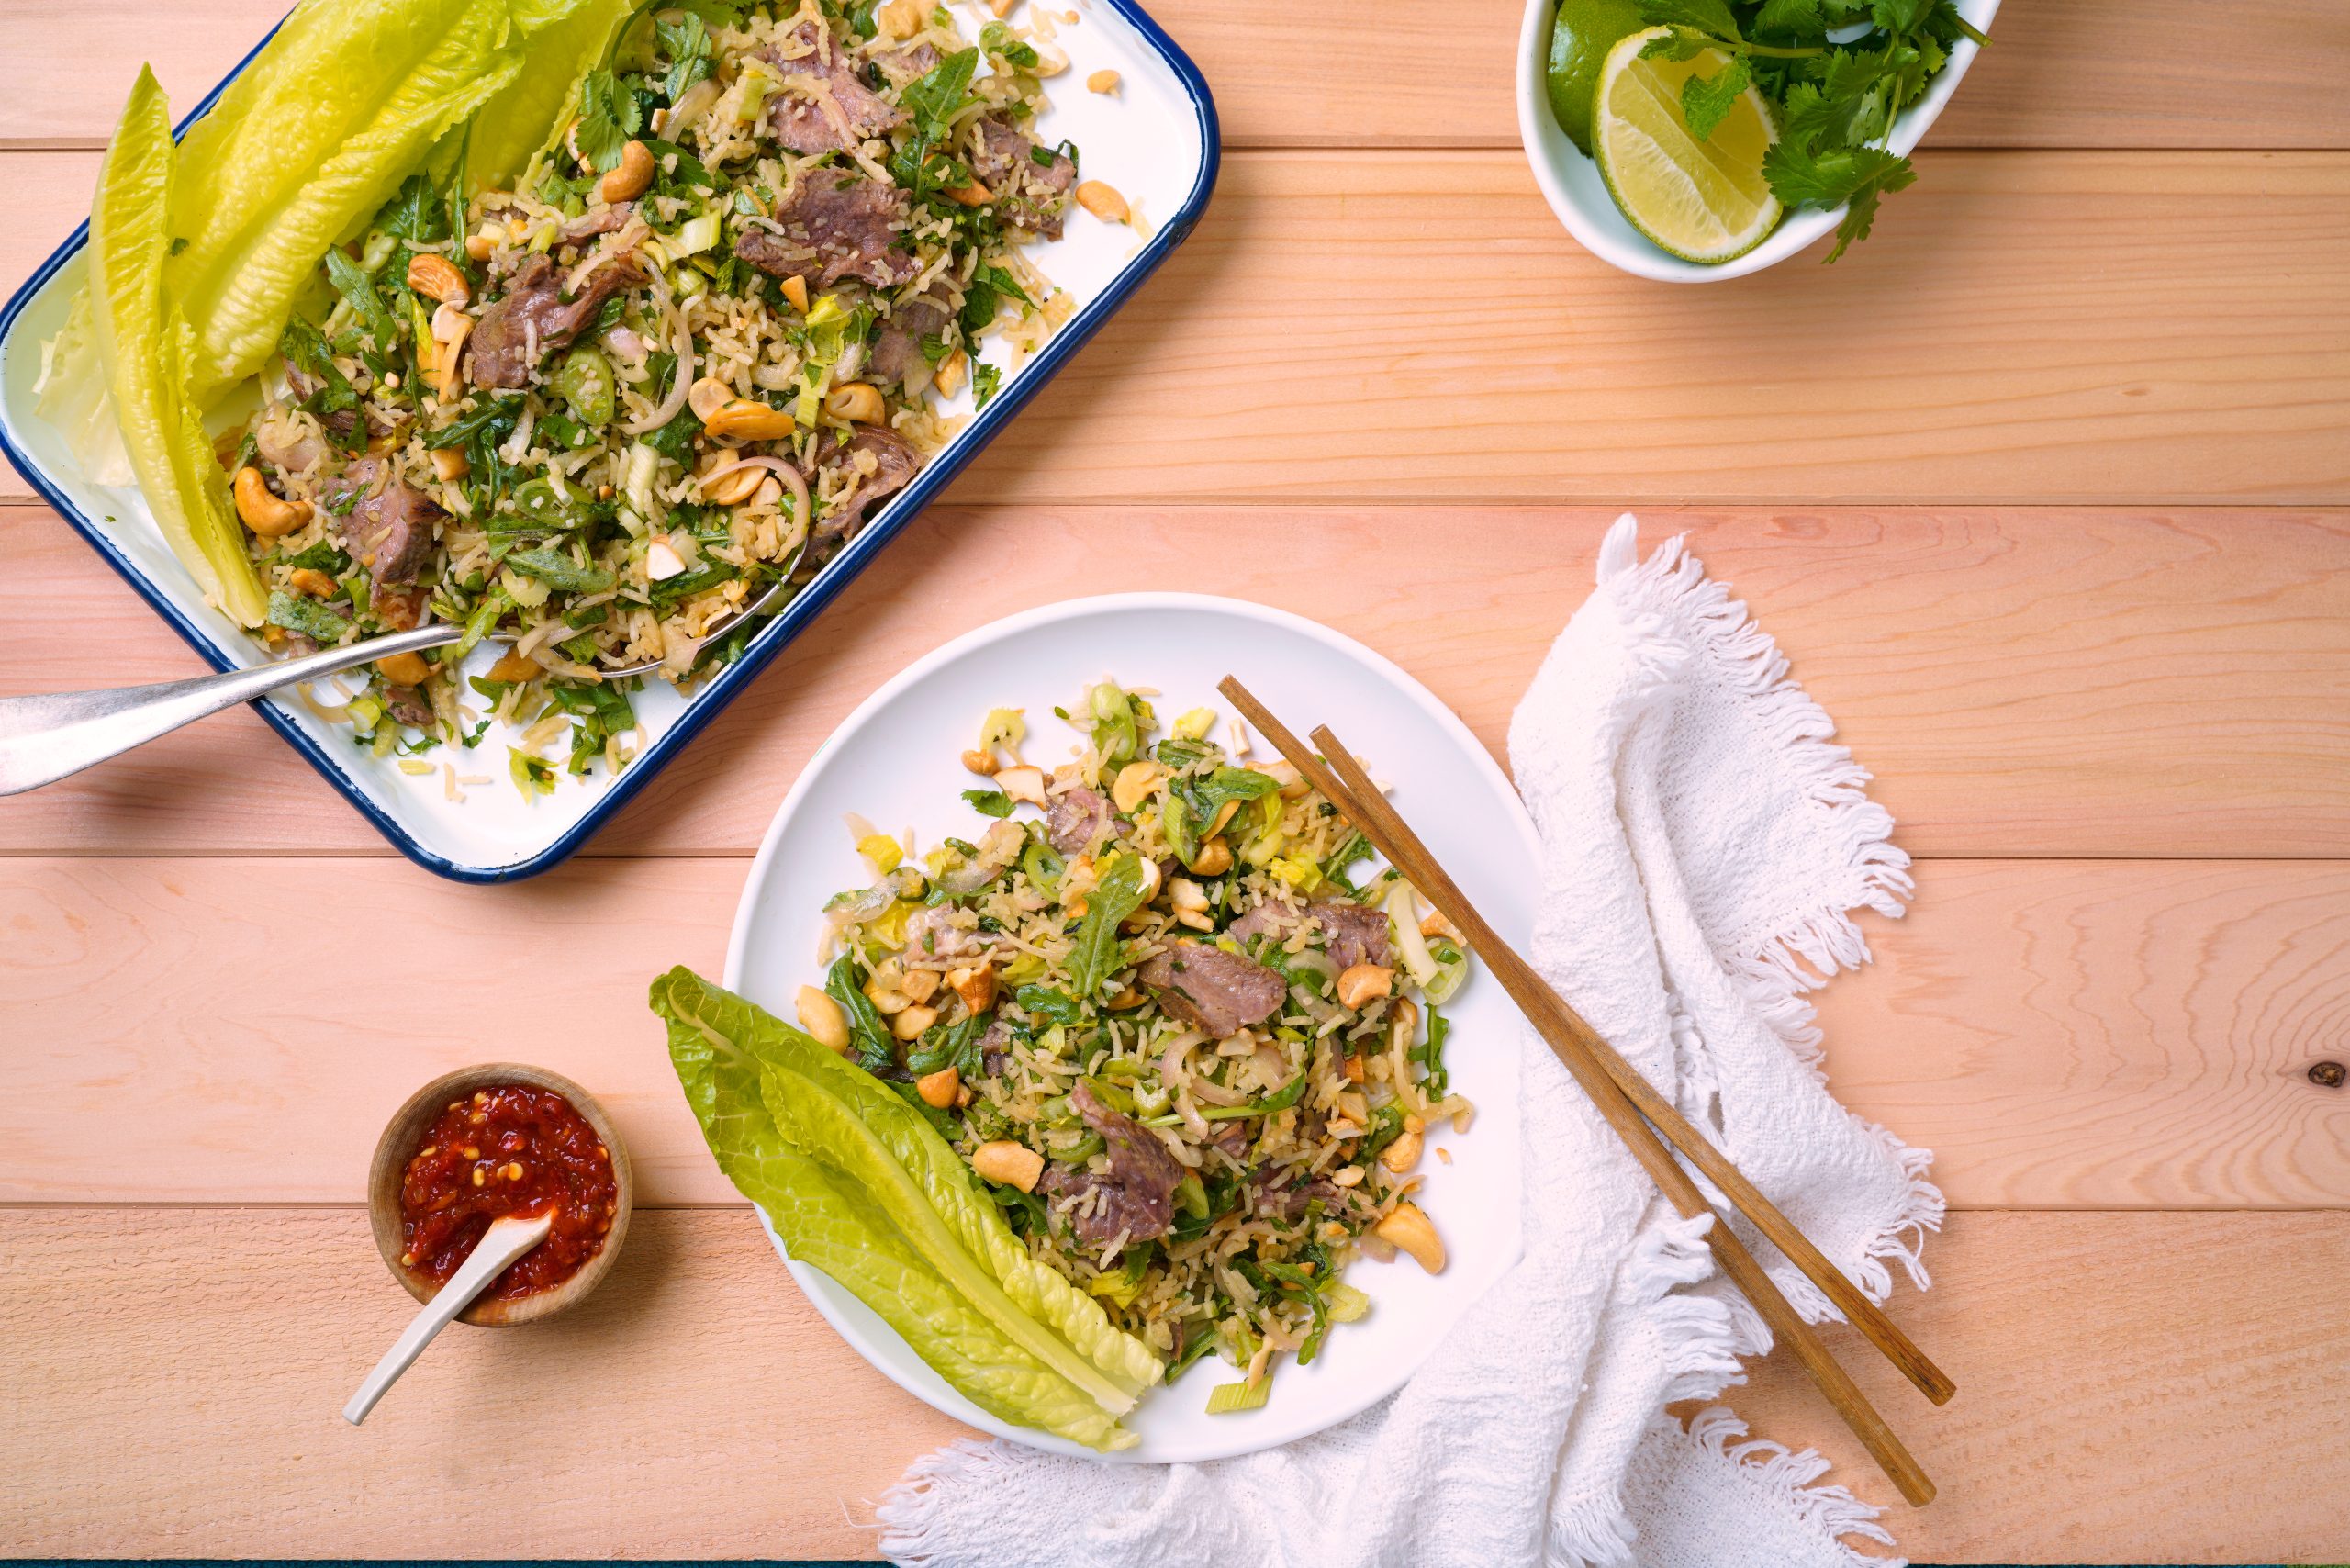 All the fresh chili, lime, and crispy rice come together to make this light and satisfying Crispy Crunchy Thai Salad sing.